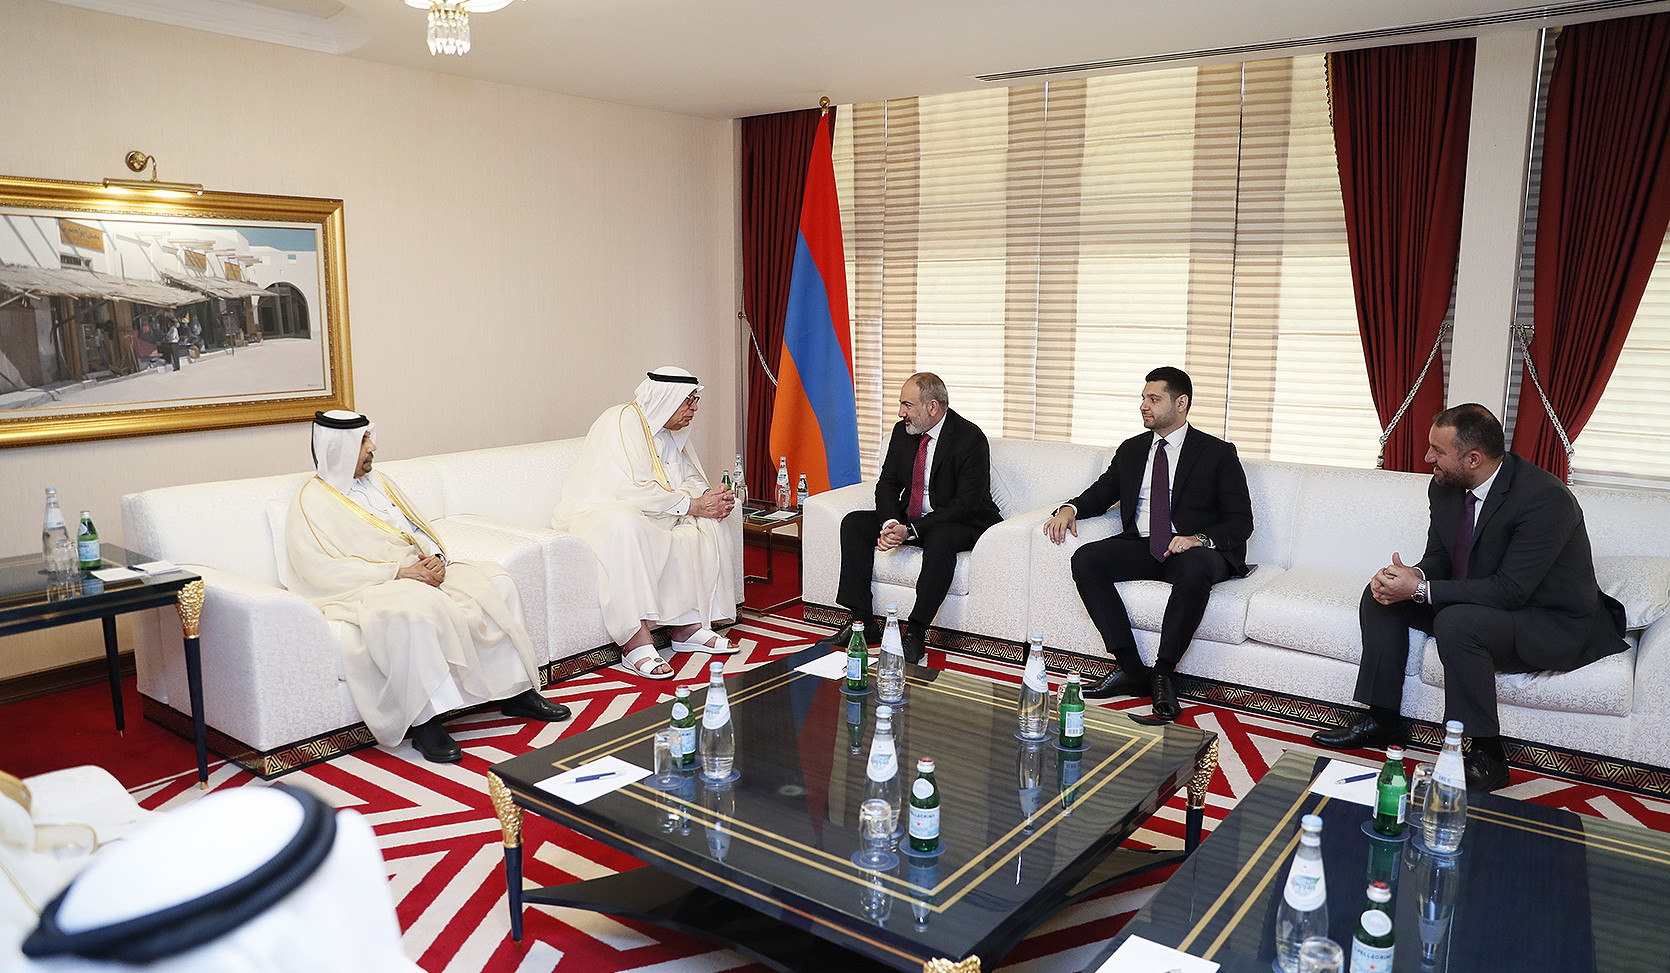 Prime Minister Pashinyan discusses implementation of investment programs in Armenia with members of Qatar Business Council